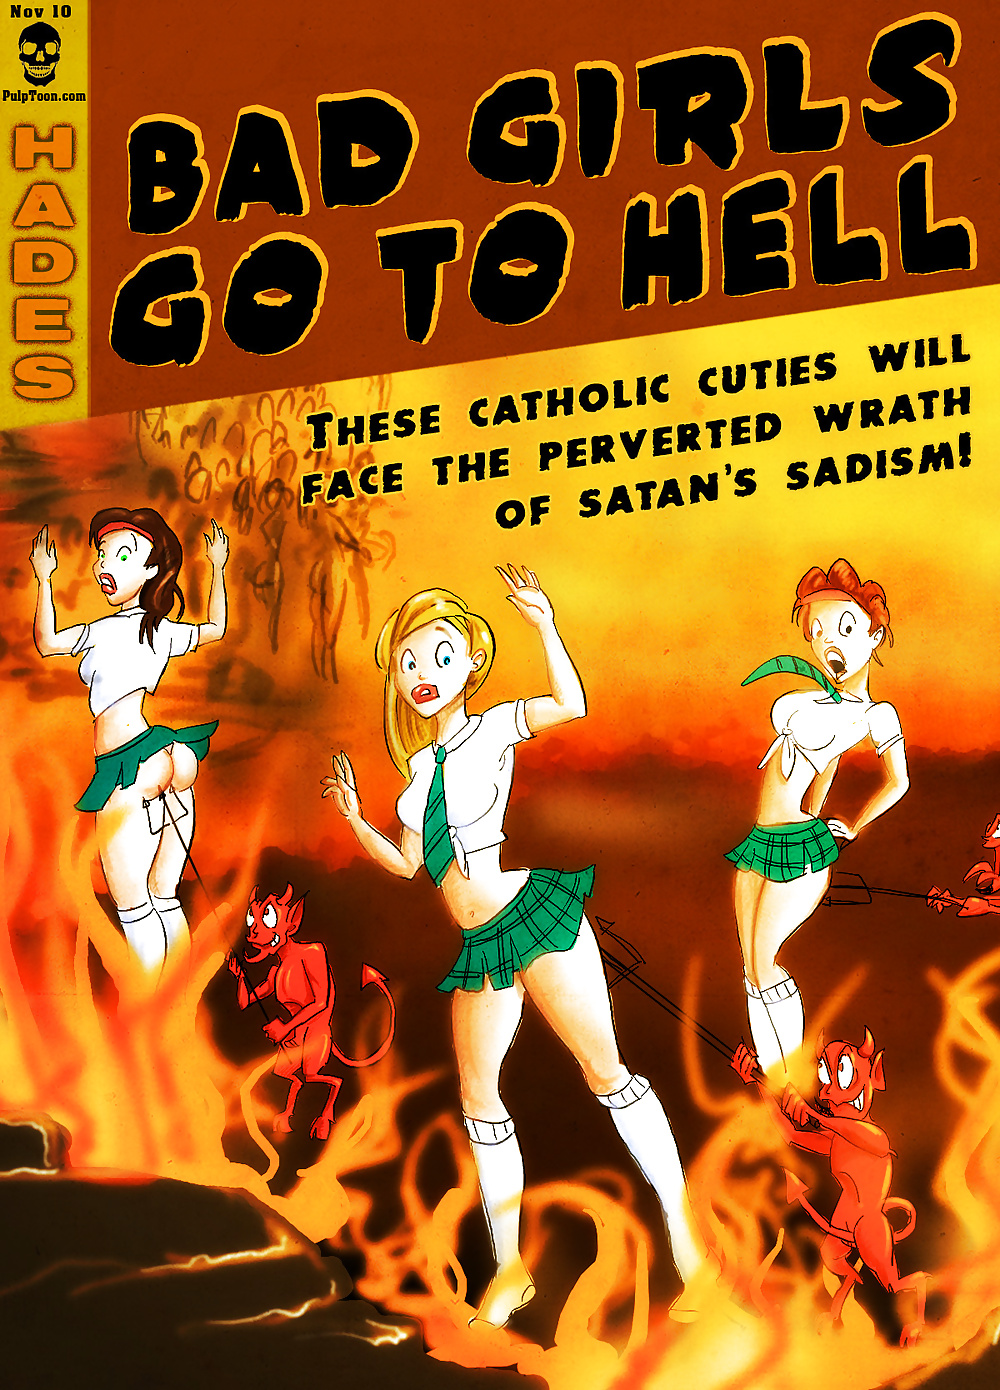 Bad girls go to hell #40252662